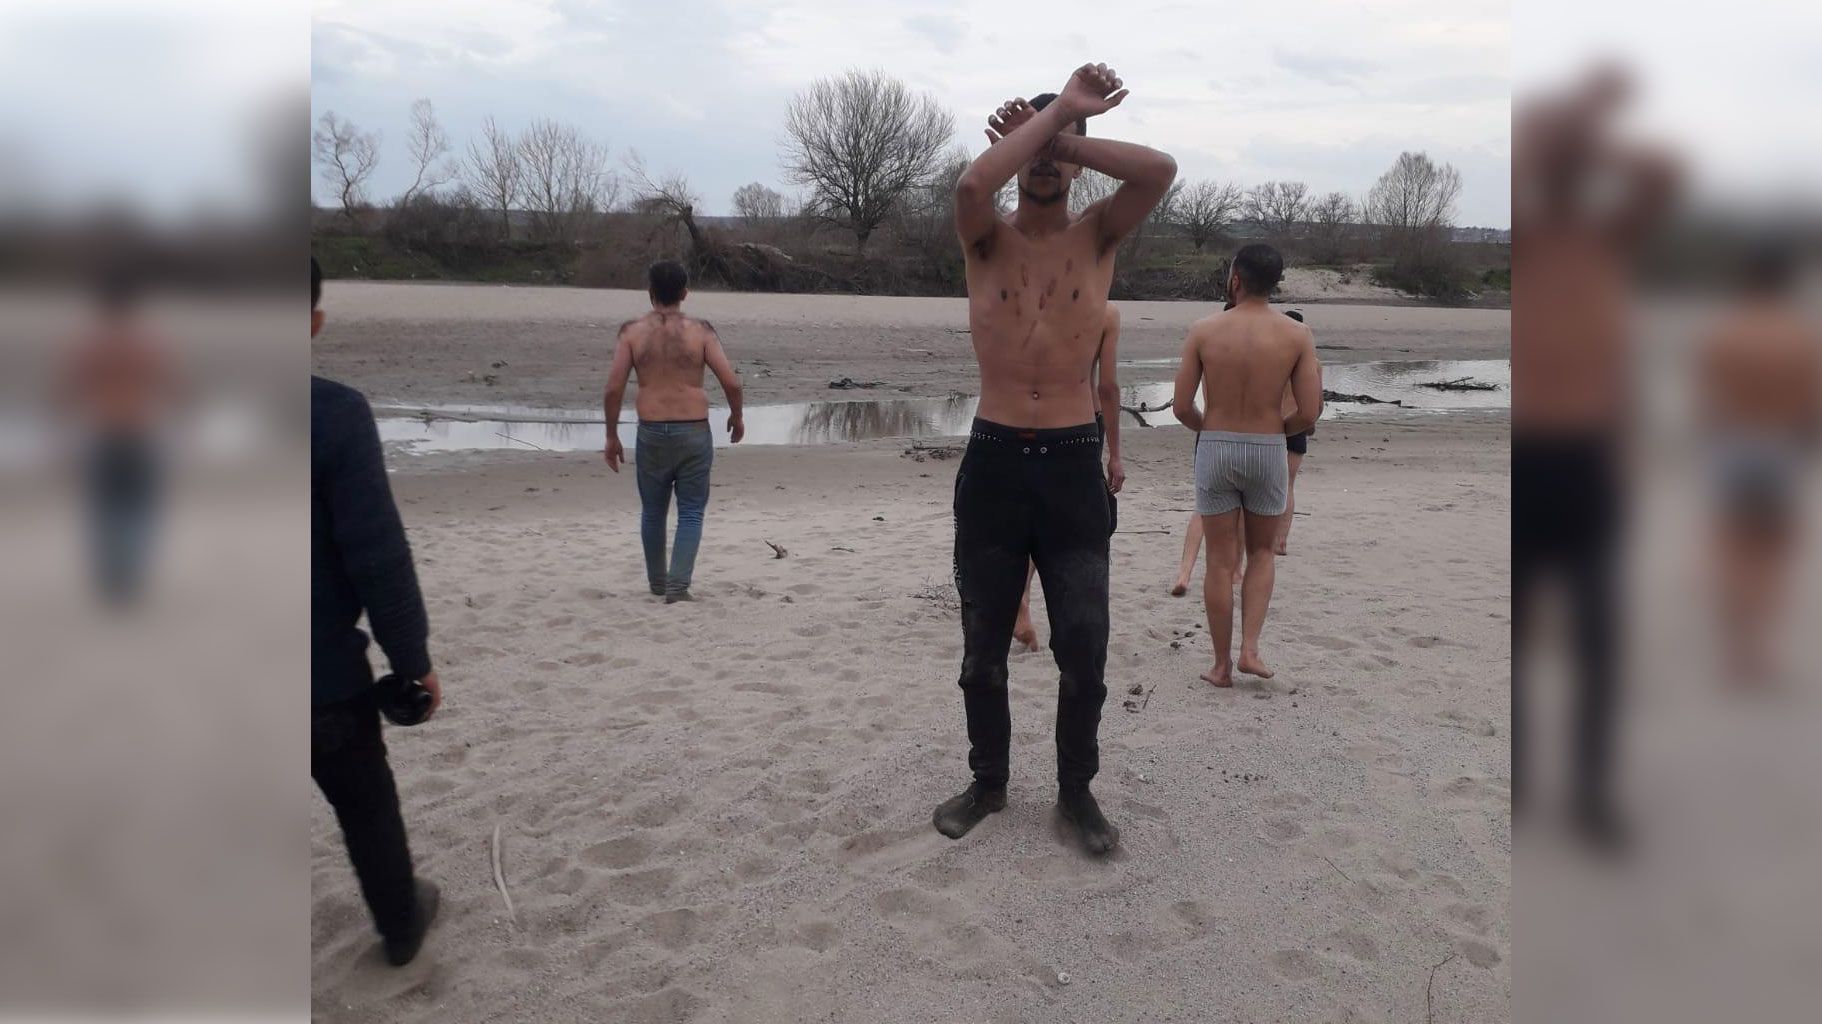 Greece strips refugees to their underwear, sends them back to